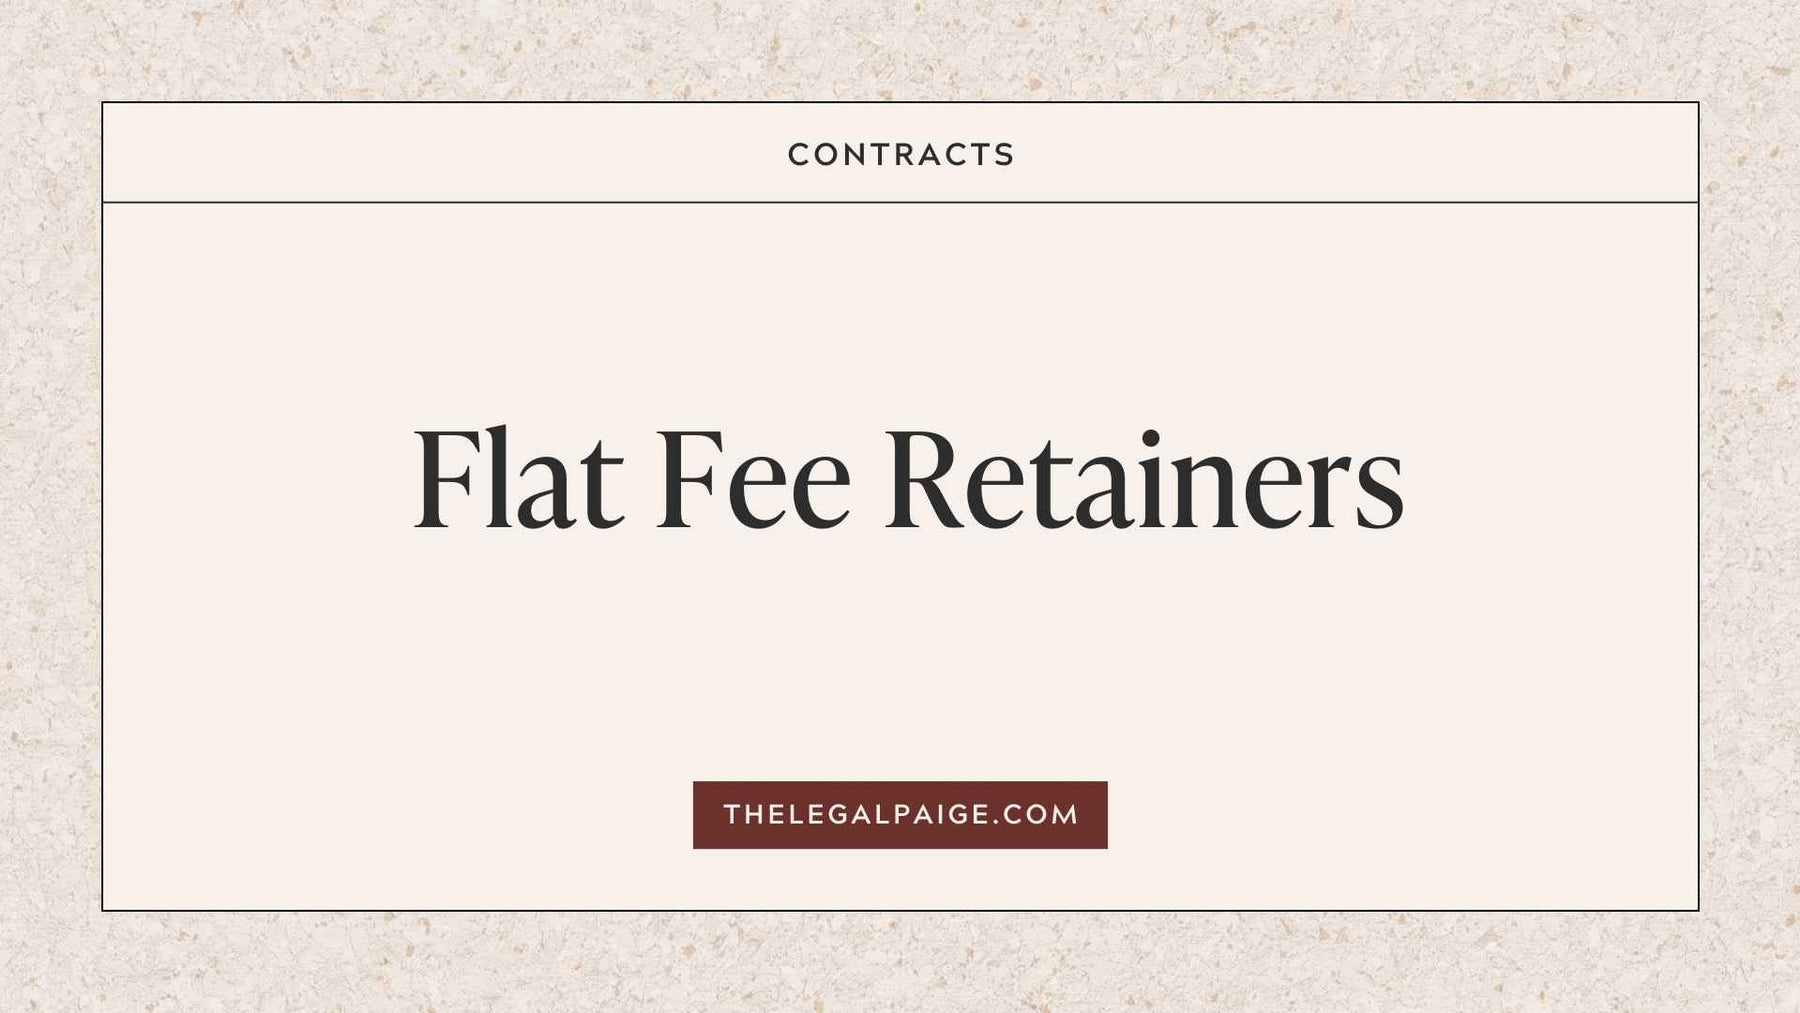 Flat Fee Retainers